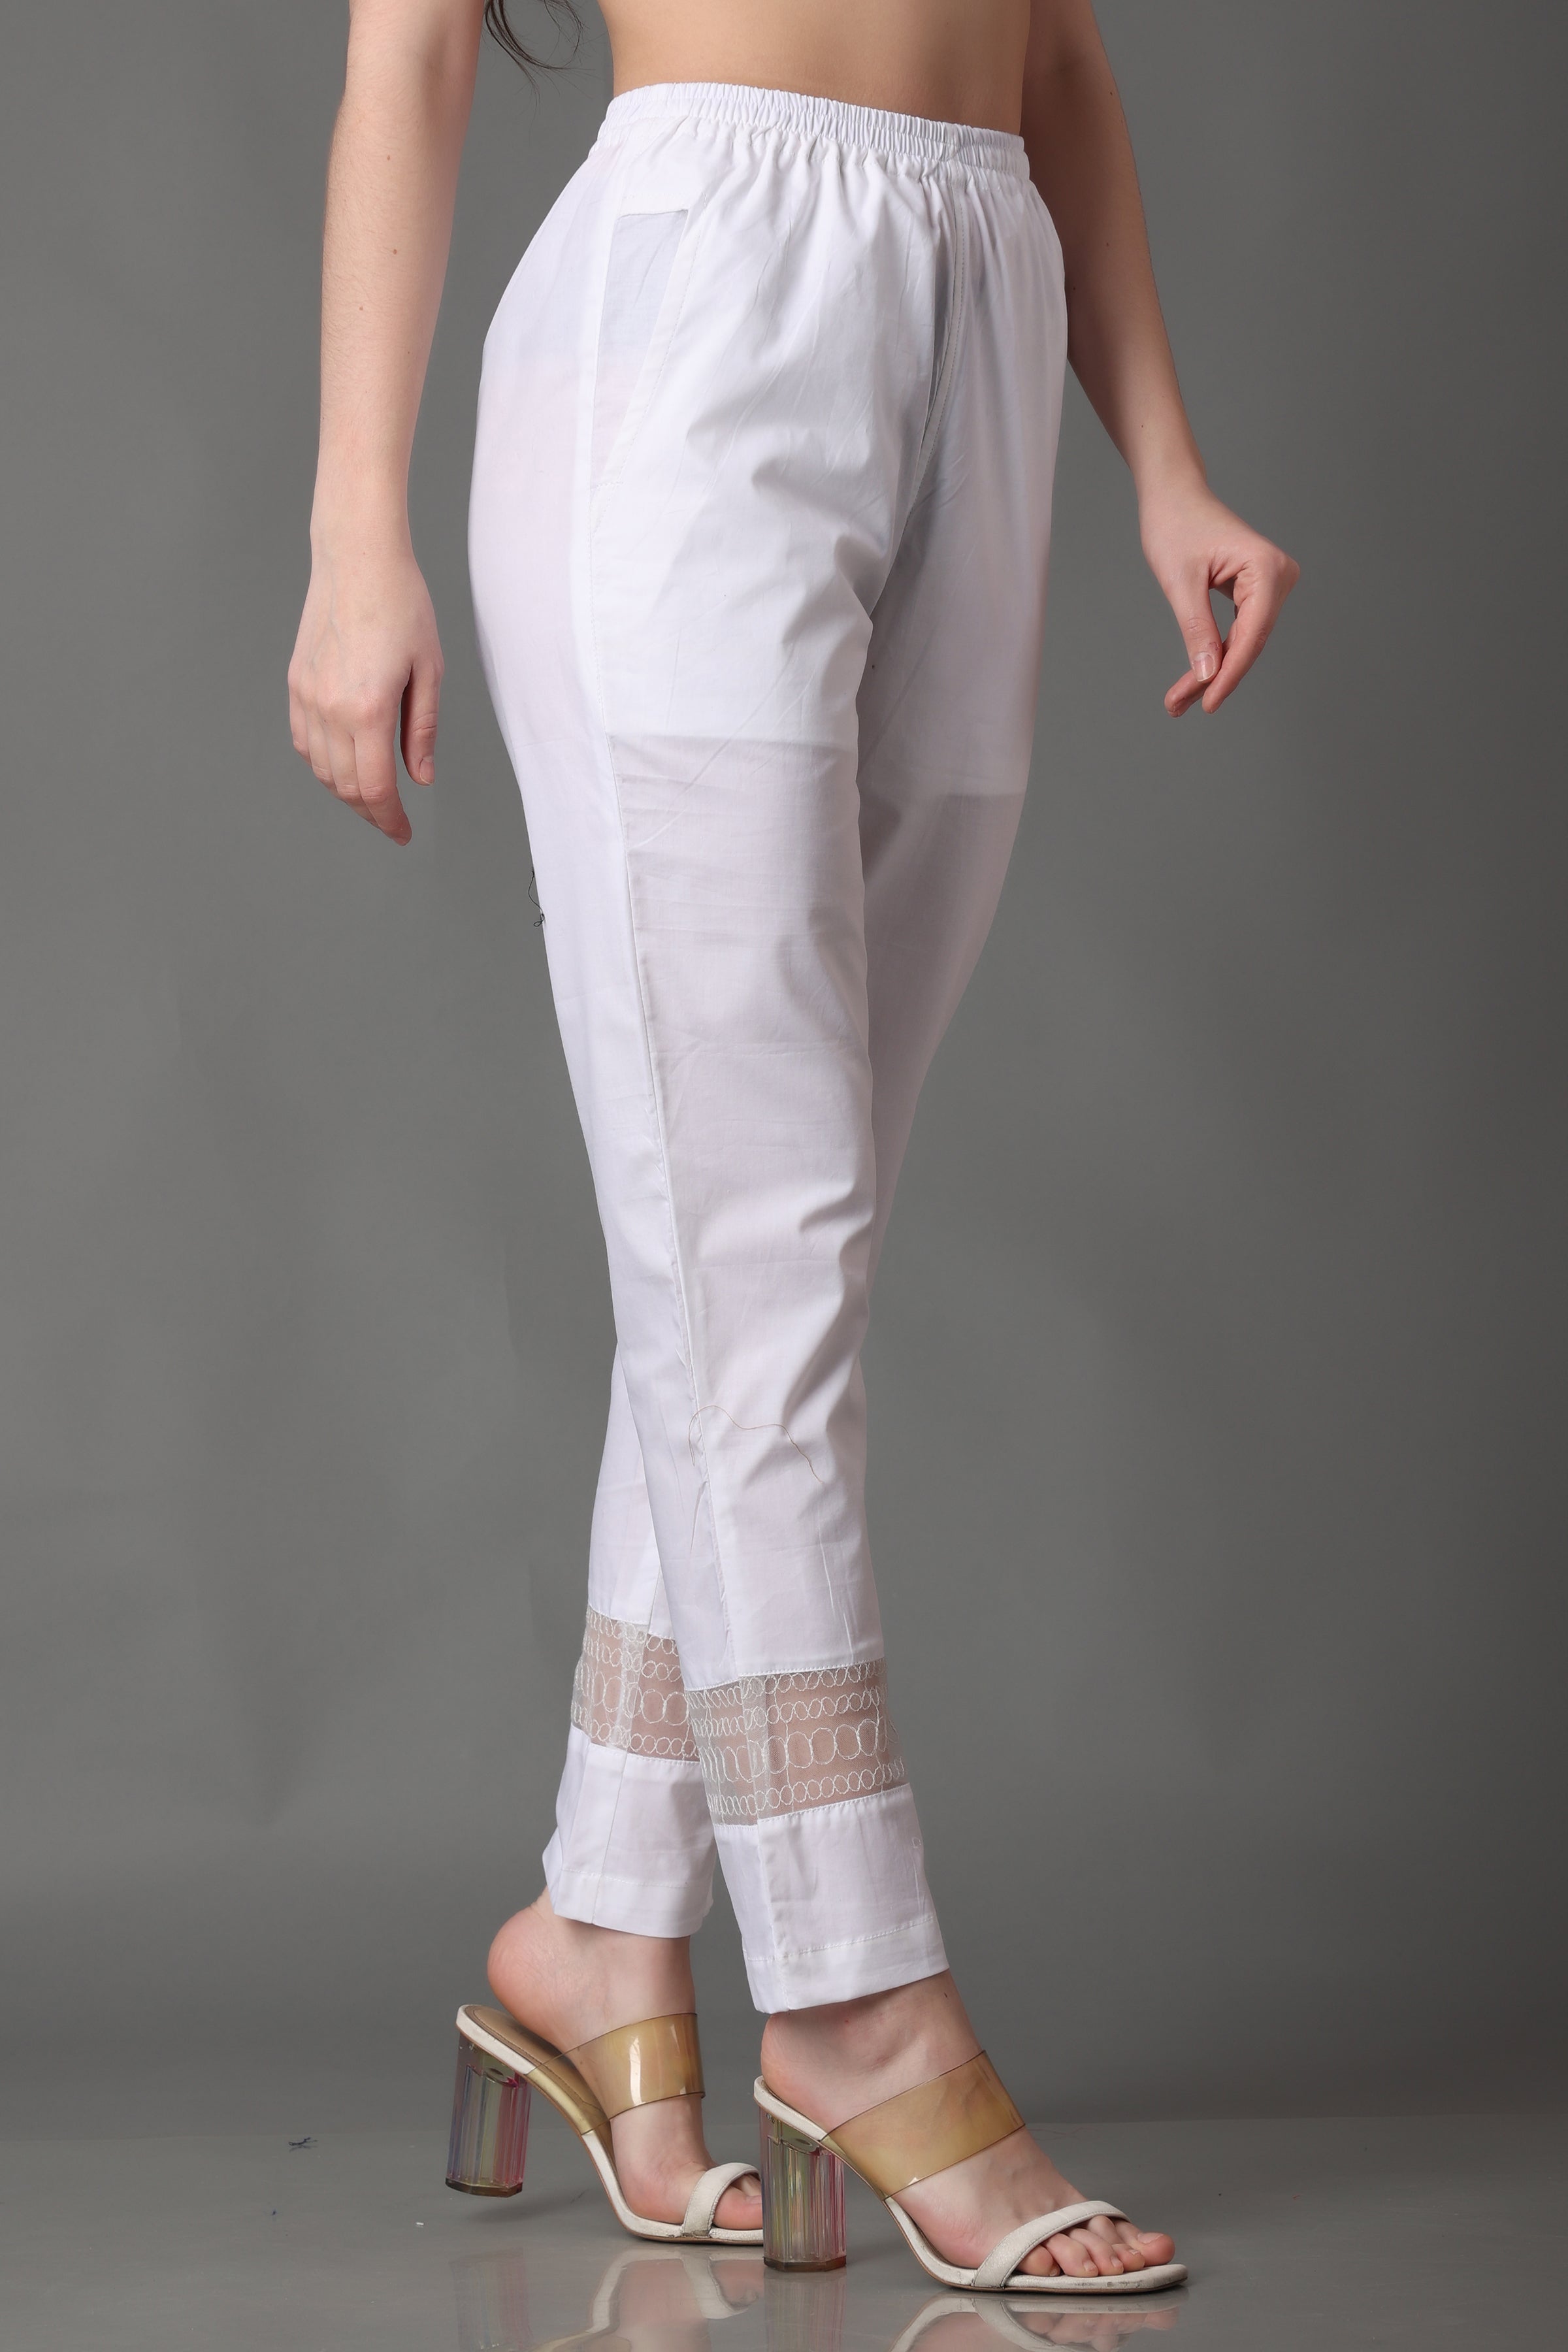 White Palazzo Pants Buy Handcrafted White Palazzo Pants Online